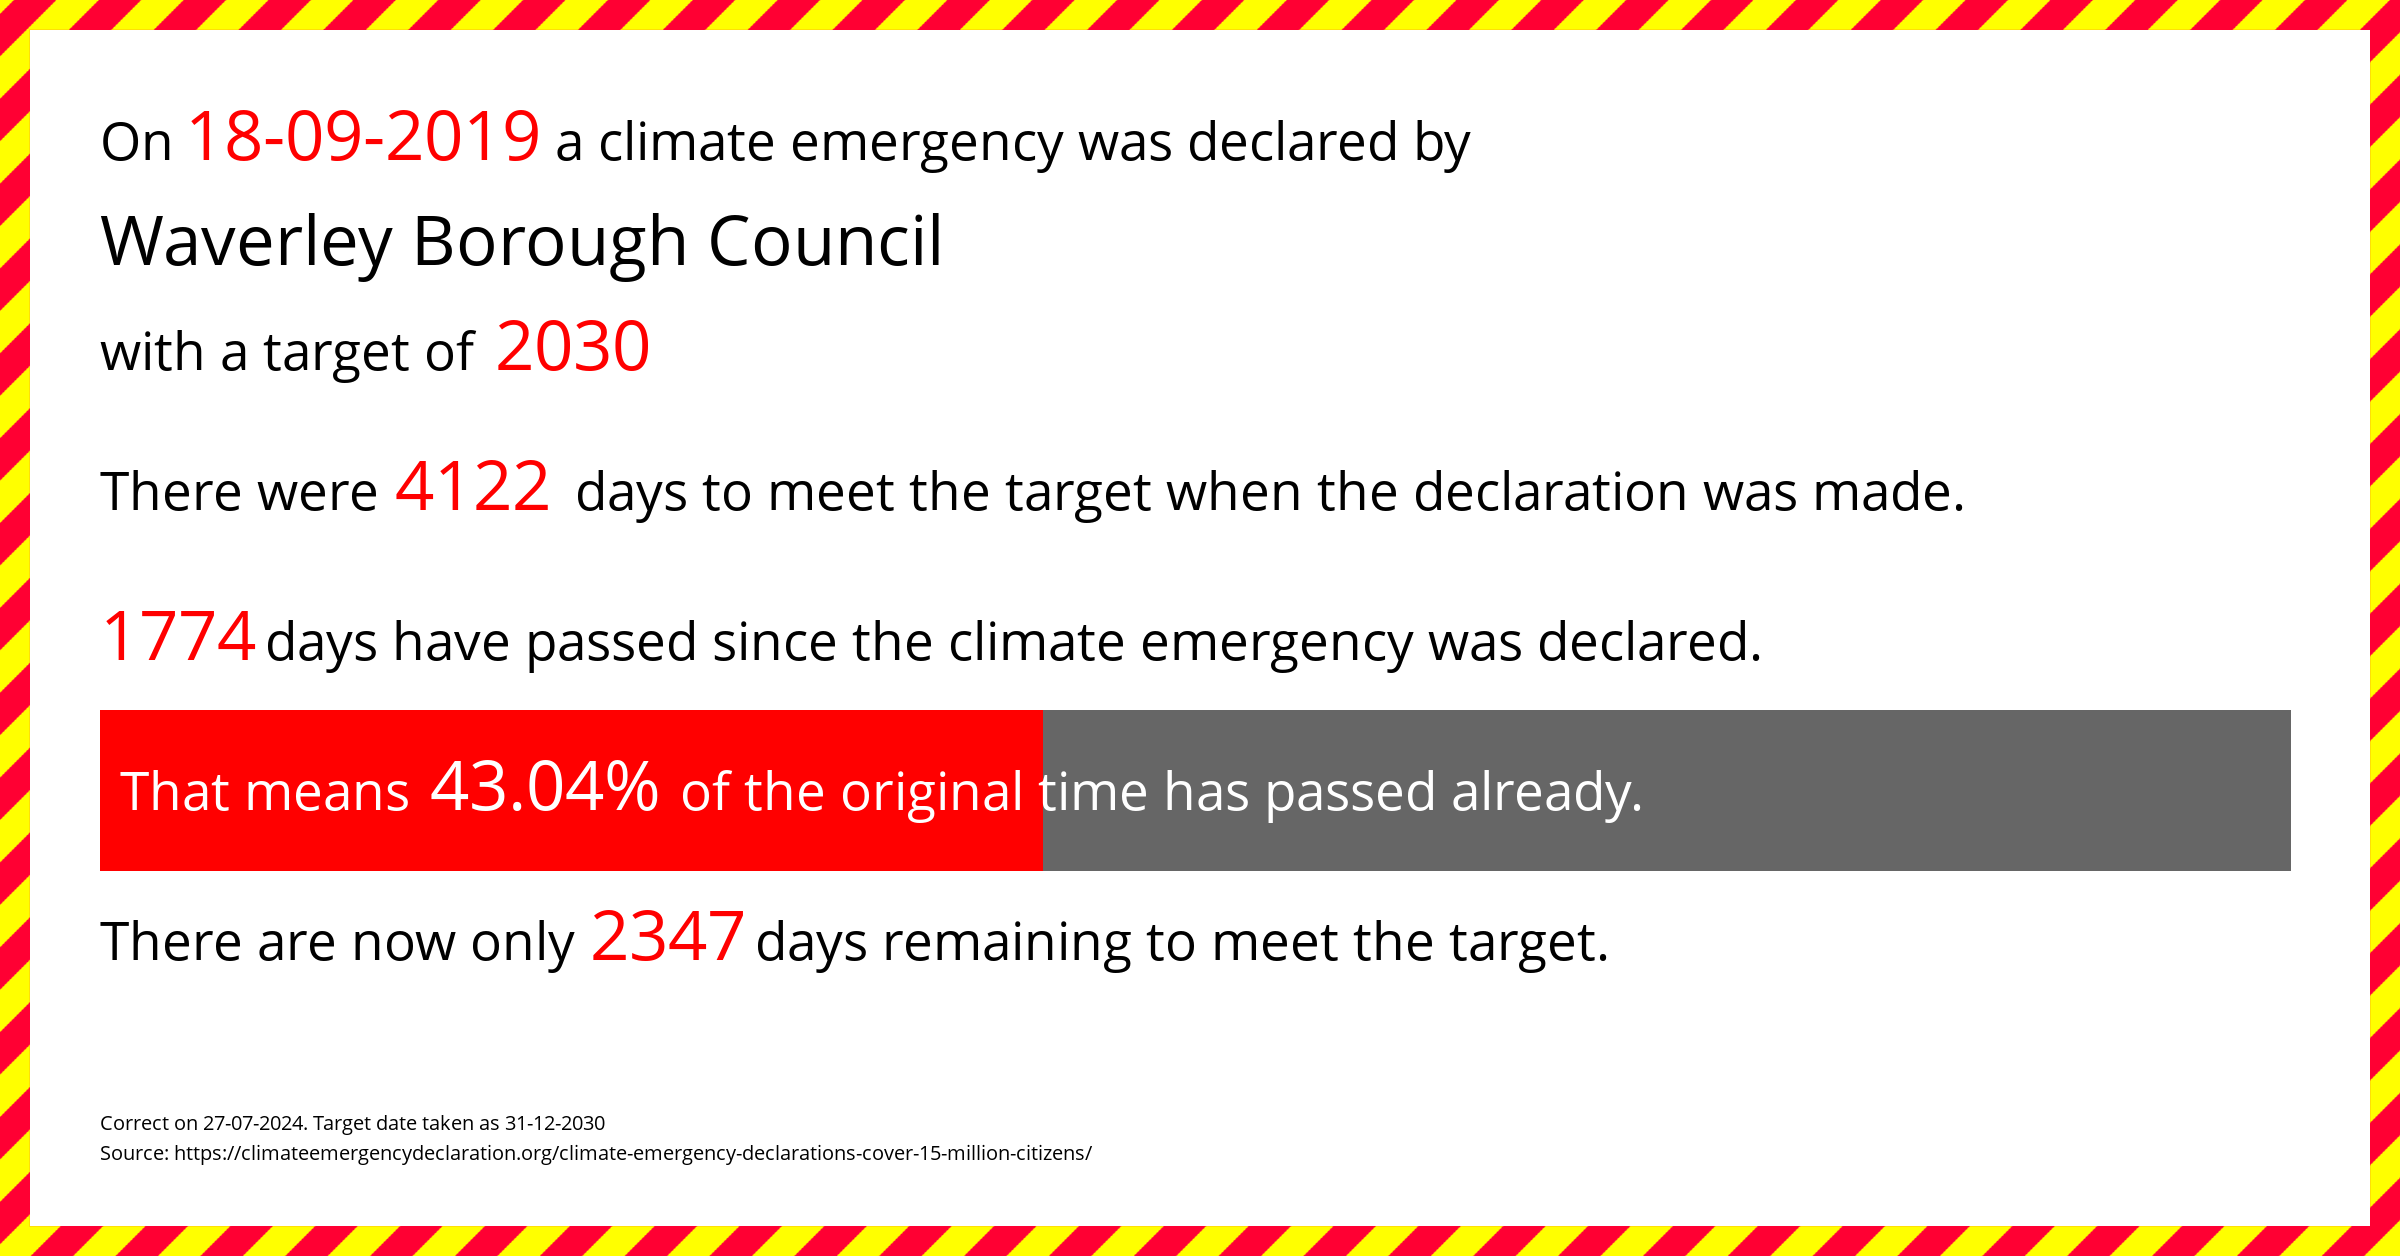 Waverley Borough Council declared a Climate emergency on Wednesday 18th September 2019, with a target of 2030.